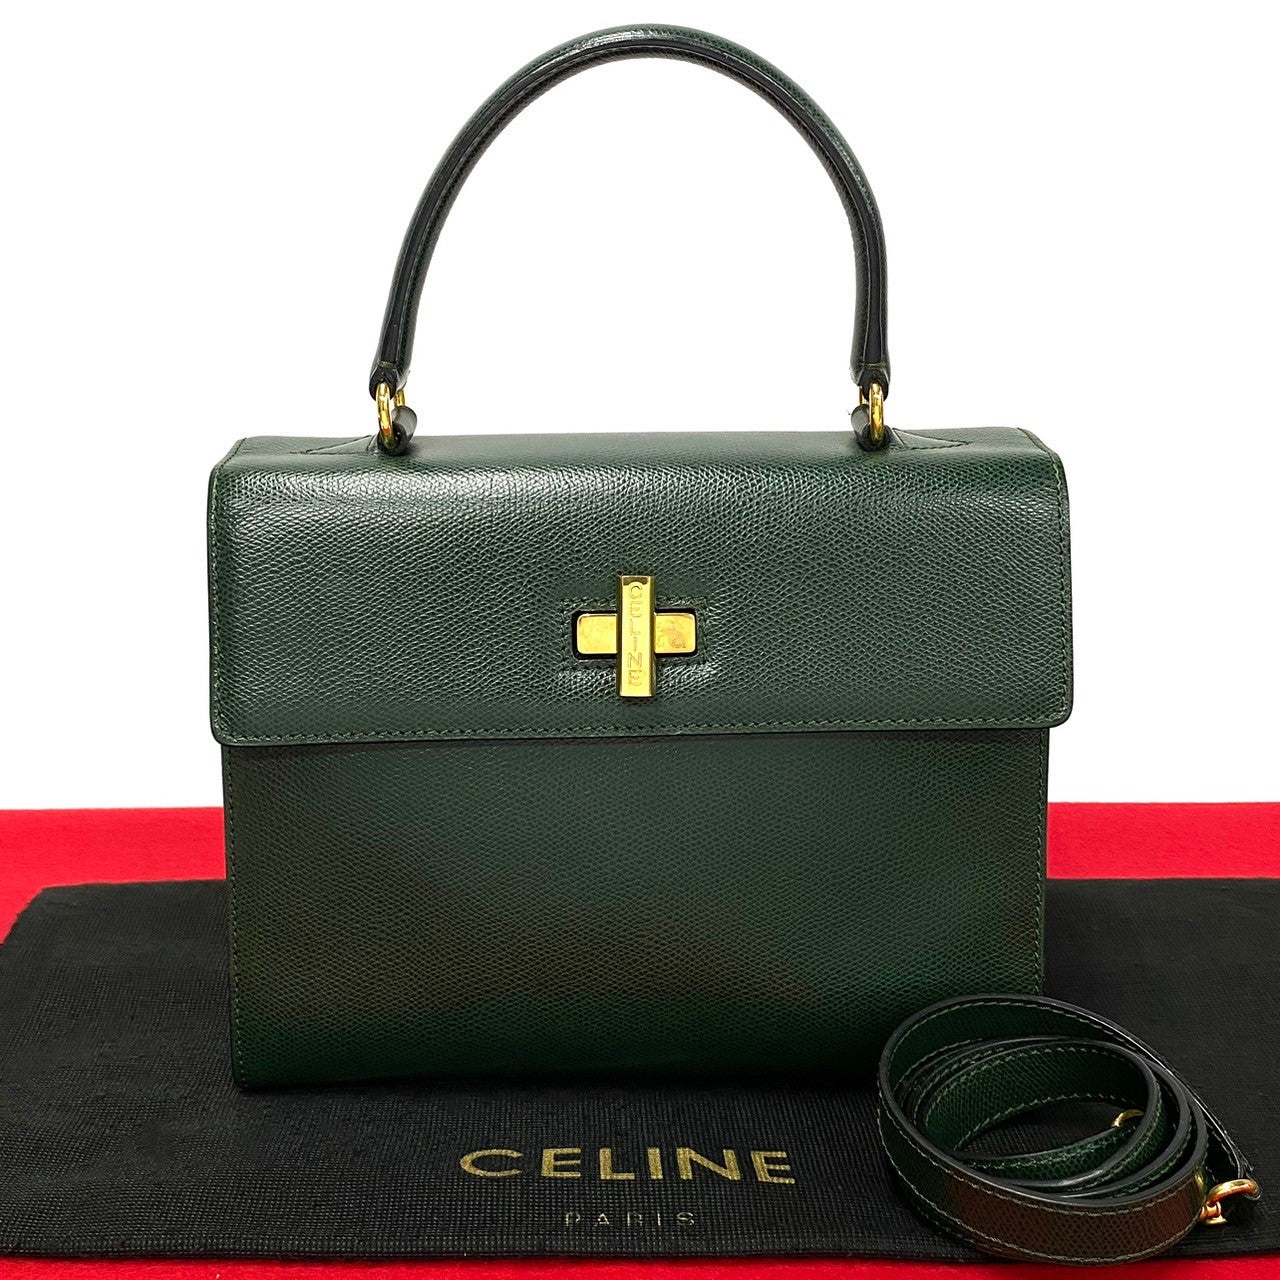 Celine Leather Handbag Leather Crossbody Bag in Excellent condition